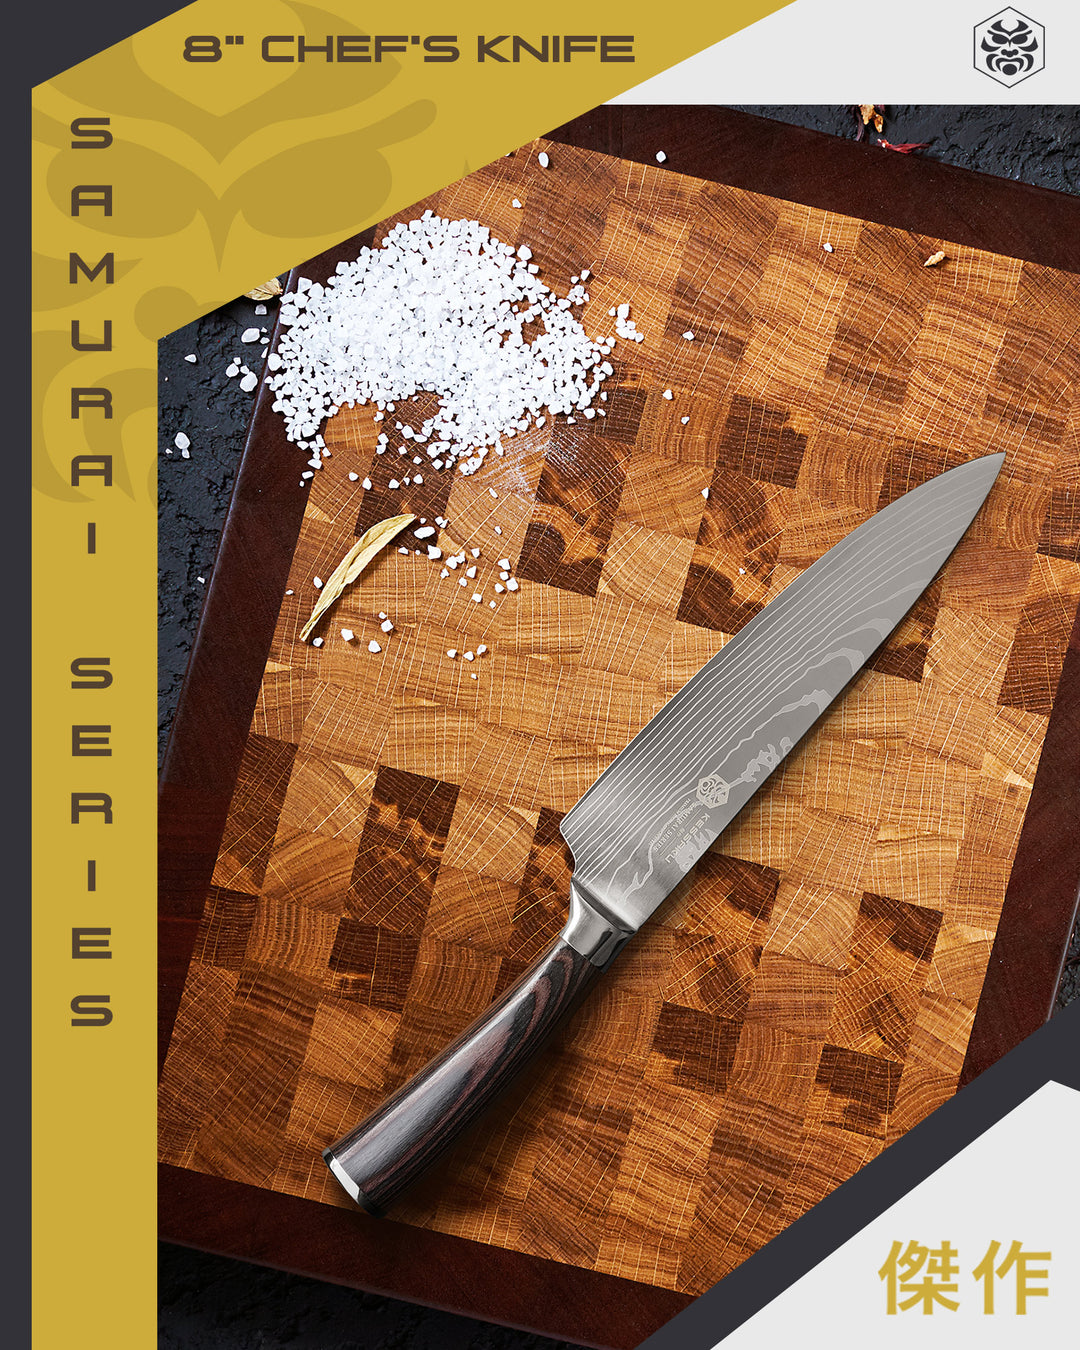 The Samurai Chef's Knife on a cutting board with a mound of sea salt